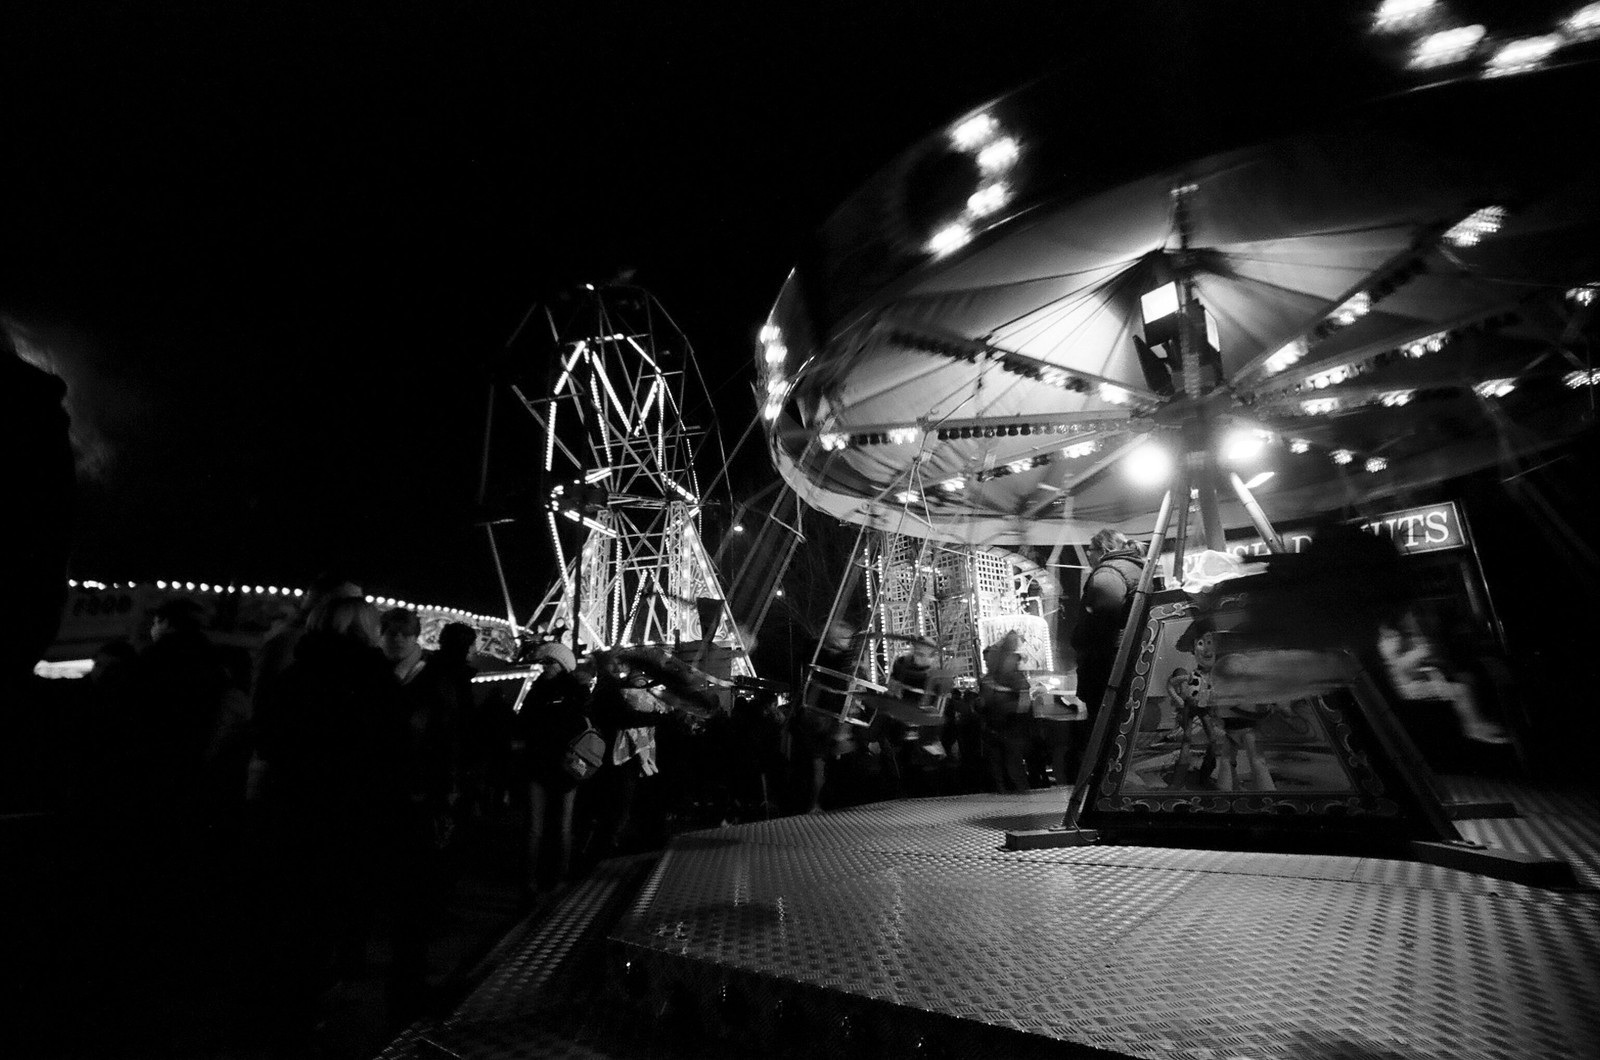 Xmas Fayre with a Lomo LC-Wide